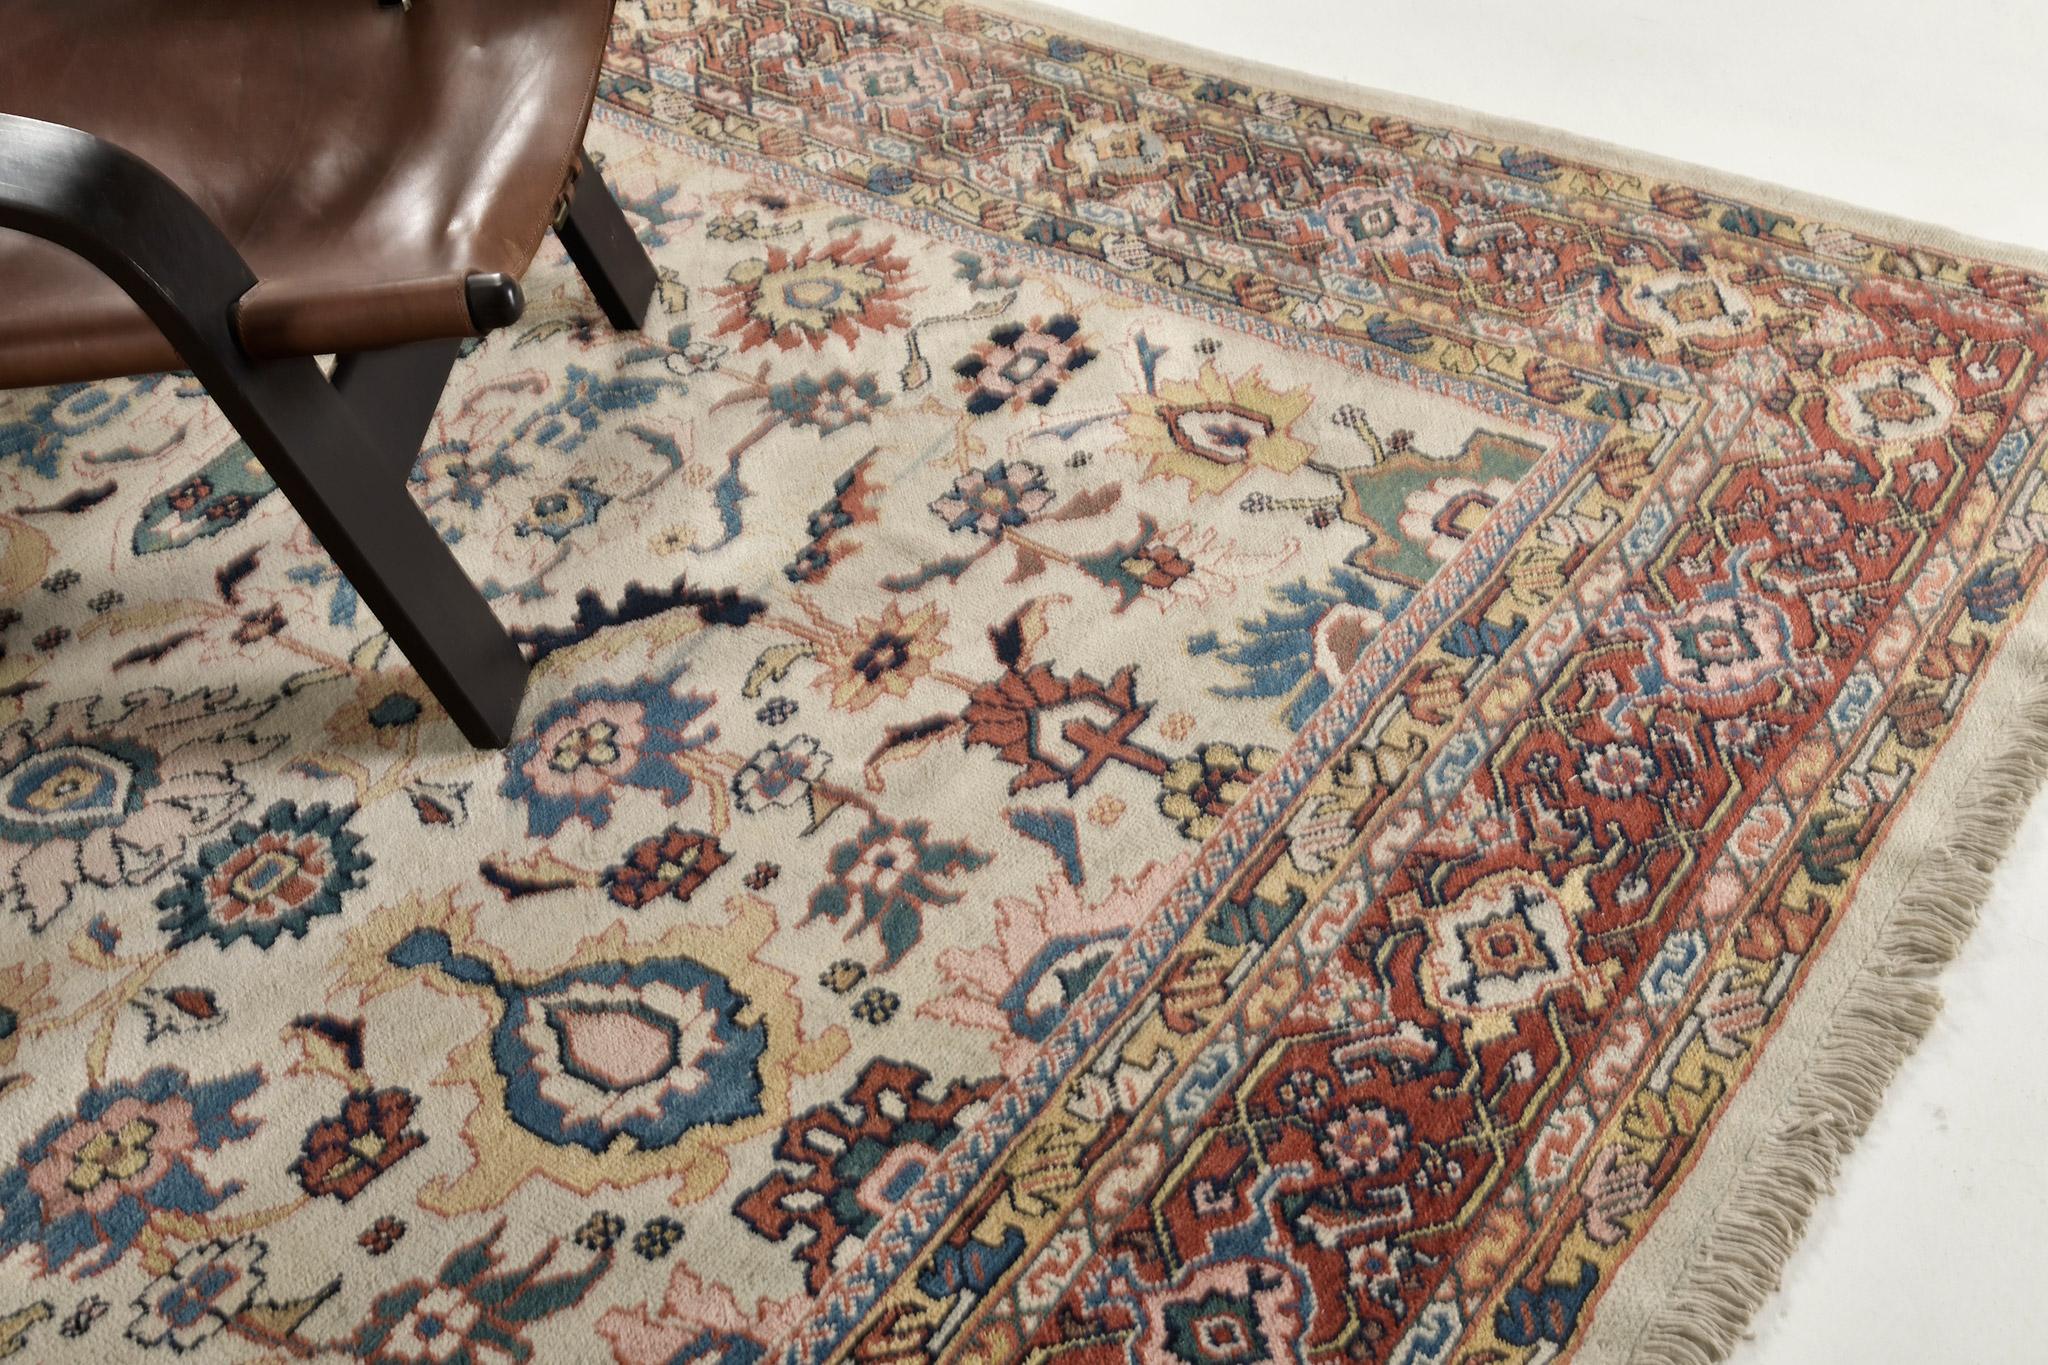 This impressive Ziegler Persian rug features a combination of neutral and blue embellishments, a  soft cinnamon border, and rust motifs throughout. All-over field design with an intricate floral lattice pattern and equal density in stylized floral